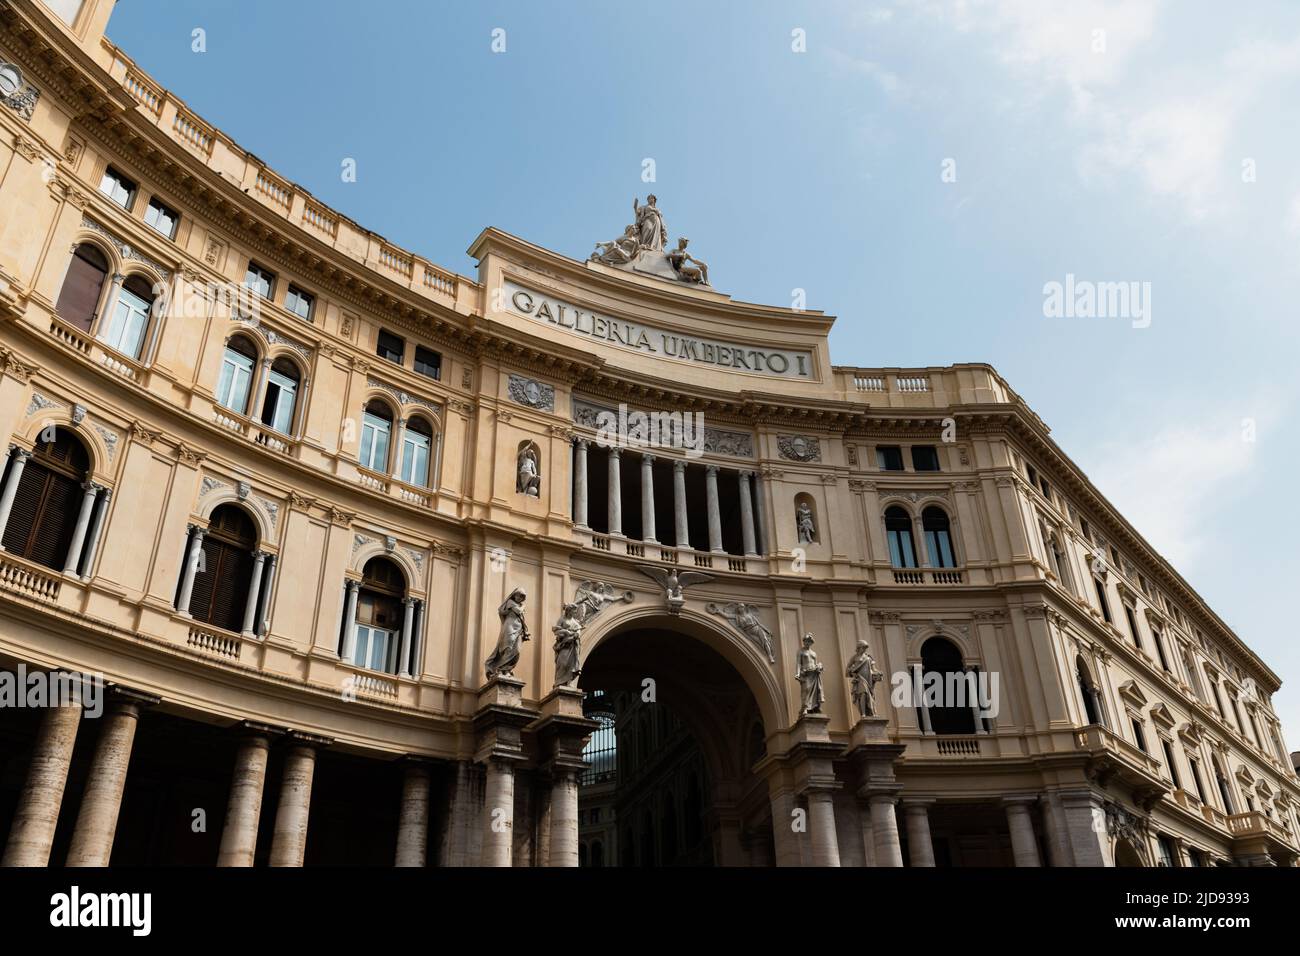 Naples, Italy. May 27, 2022. Galleria Umberto I, the main entrance to famous public shopping gallery in Naples, Italy Stock Photo